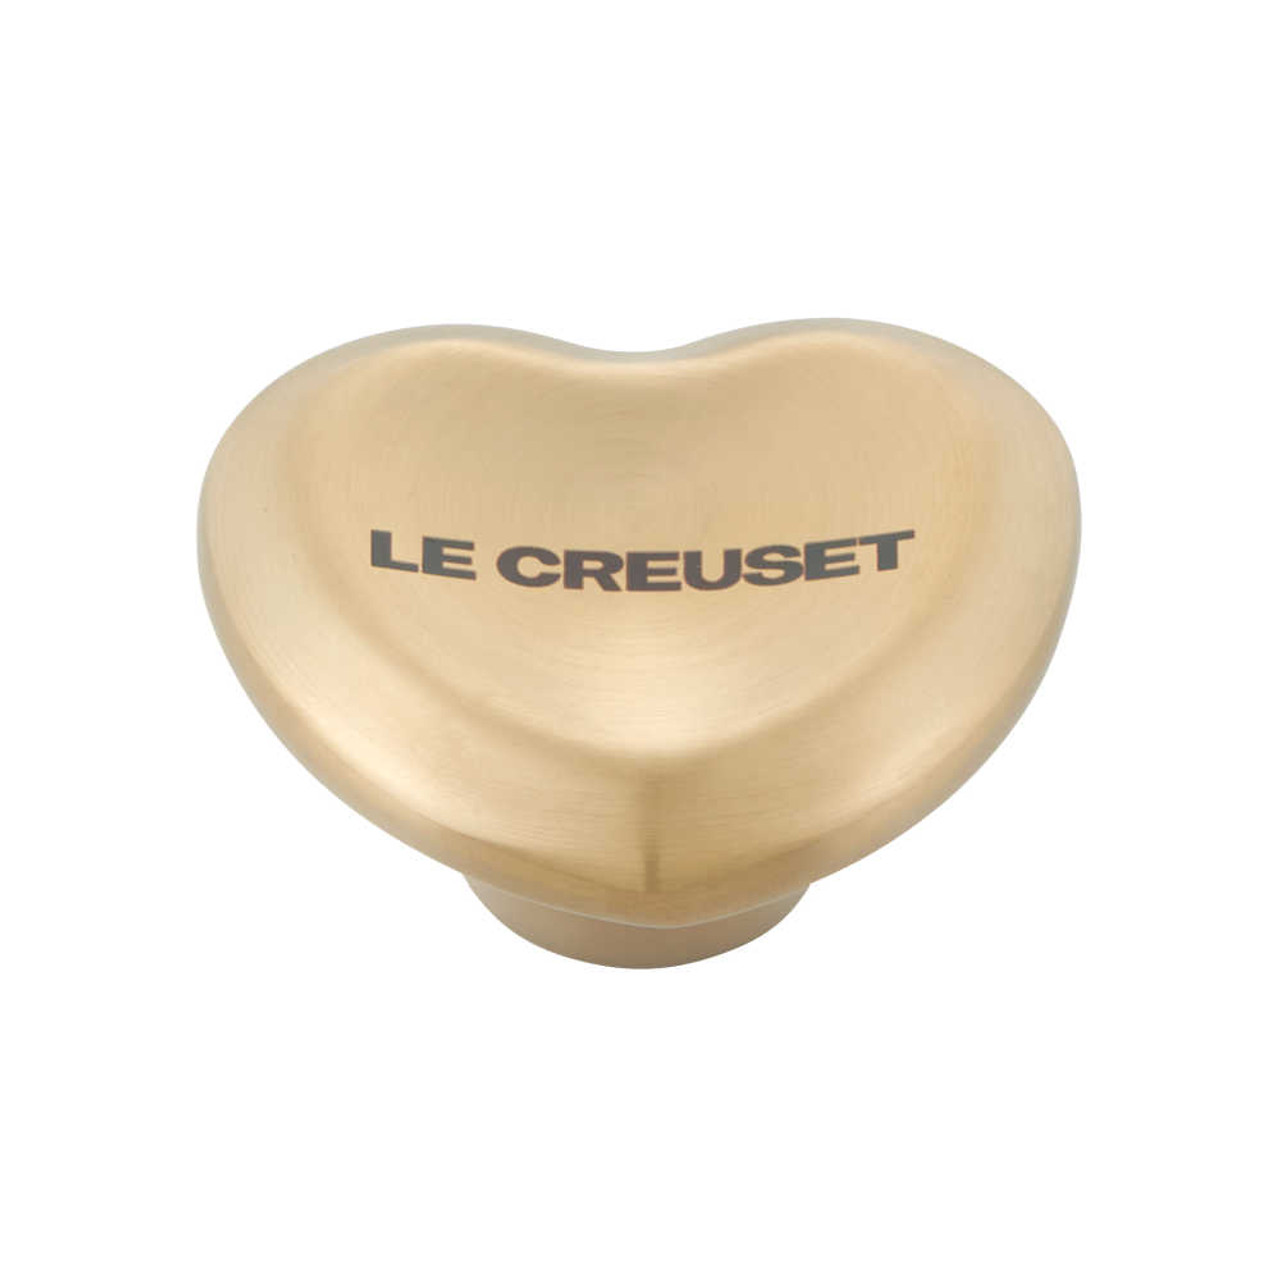 https://cdn11.bigcommerce.com/s-hccytny0od/images/stencil/1280x1280/products/4457/17486/Le_Creuset_Heart_Shaped_Gold_Knob__90438.1639443400.jpg?c=2?imbypass=on